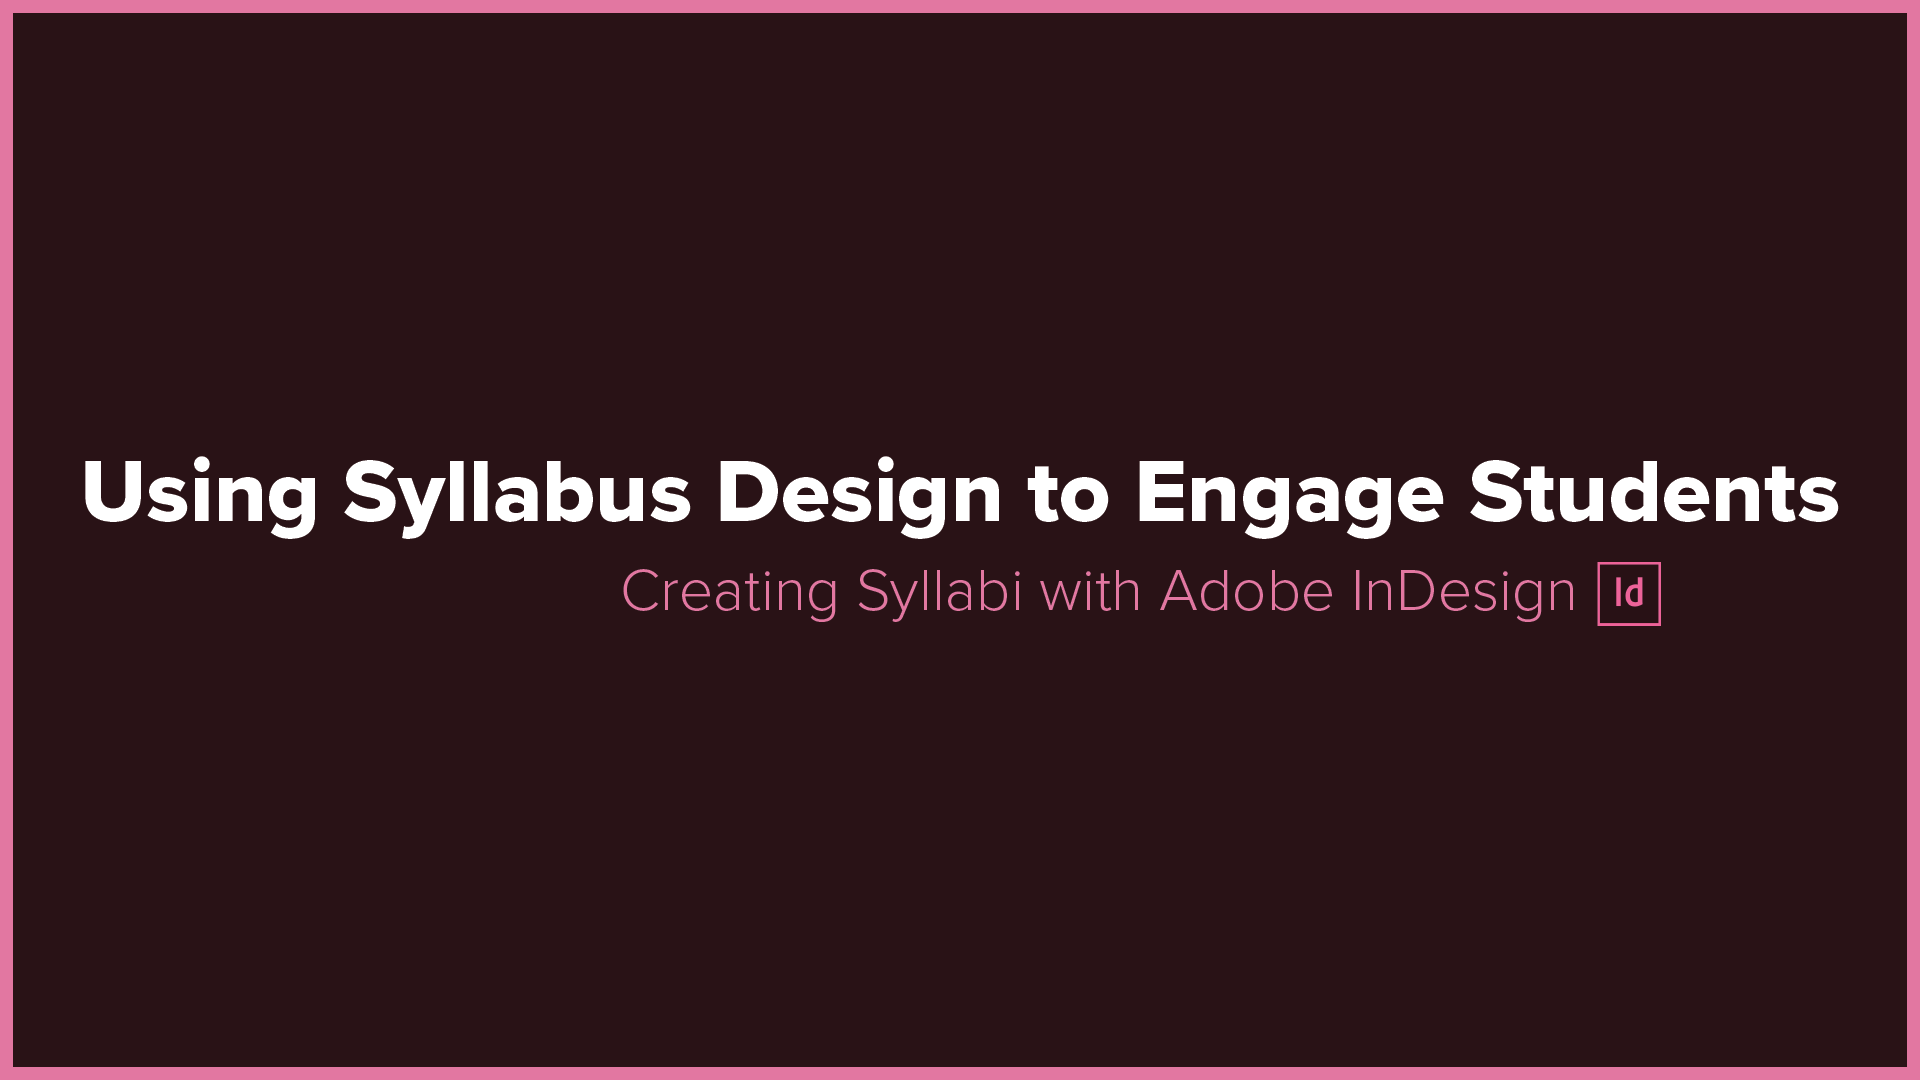 Using Syllabus Design to Engage Students | InDesign Tutorial - Adobe at ACU